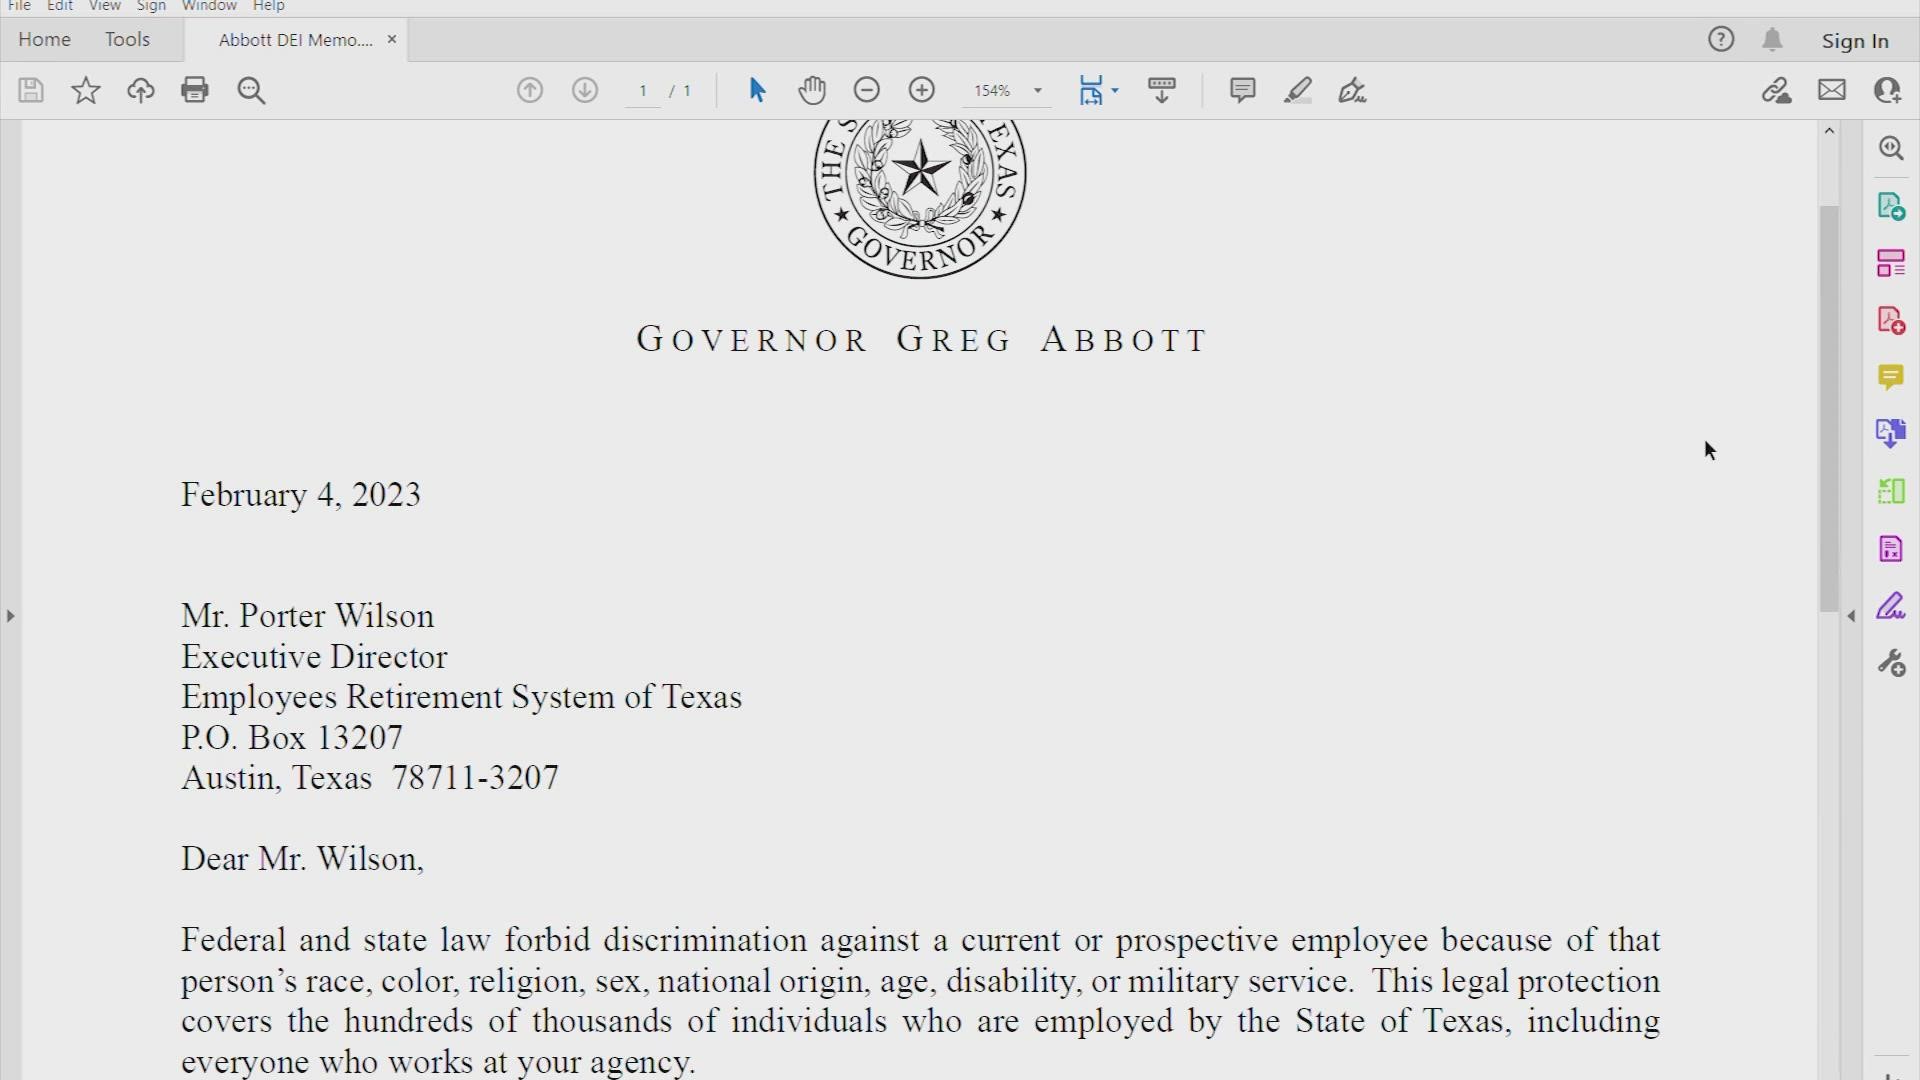 Gov. Greg Abbott’s chief of staff told agency leaders that using DEI policies violates federal and state employment laws.